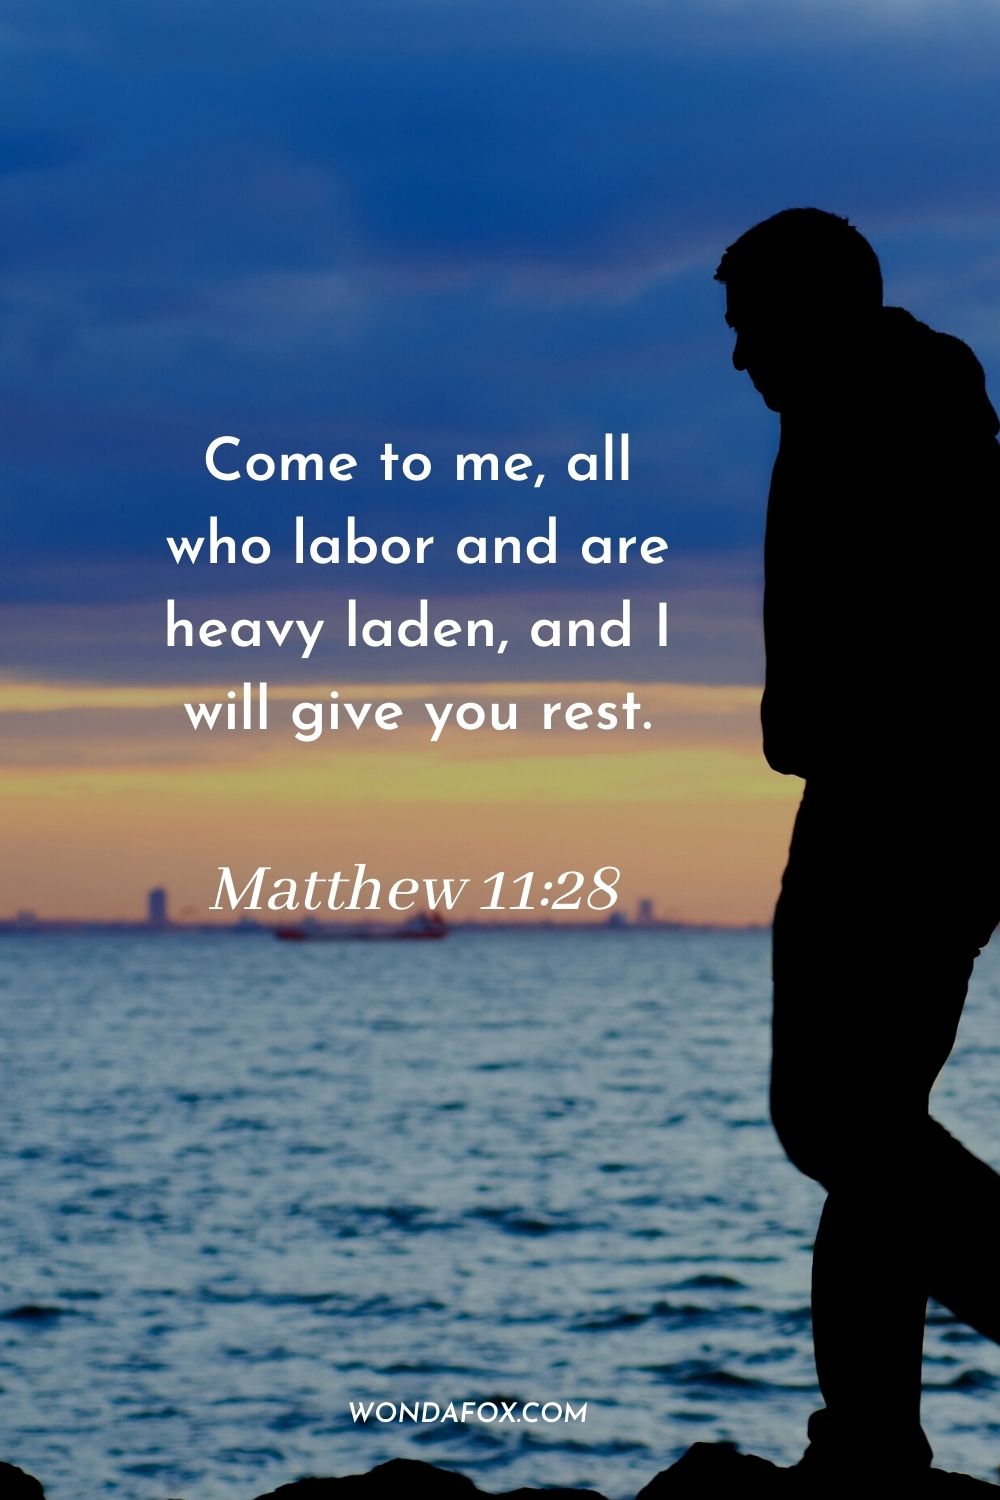 Come to me, all who labor and are heavy laden, and I will give you rest. Matthew 11:28